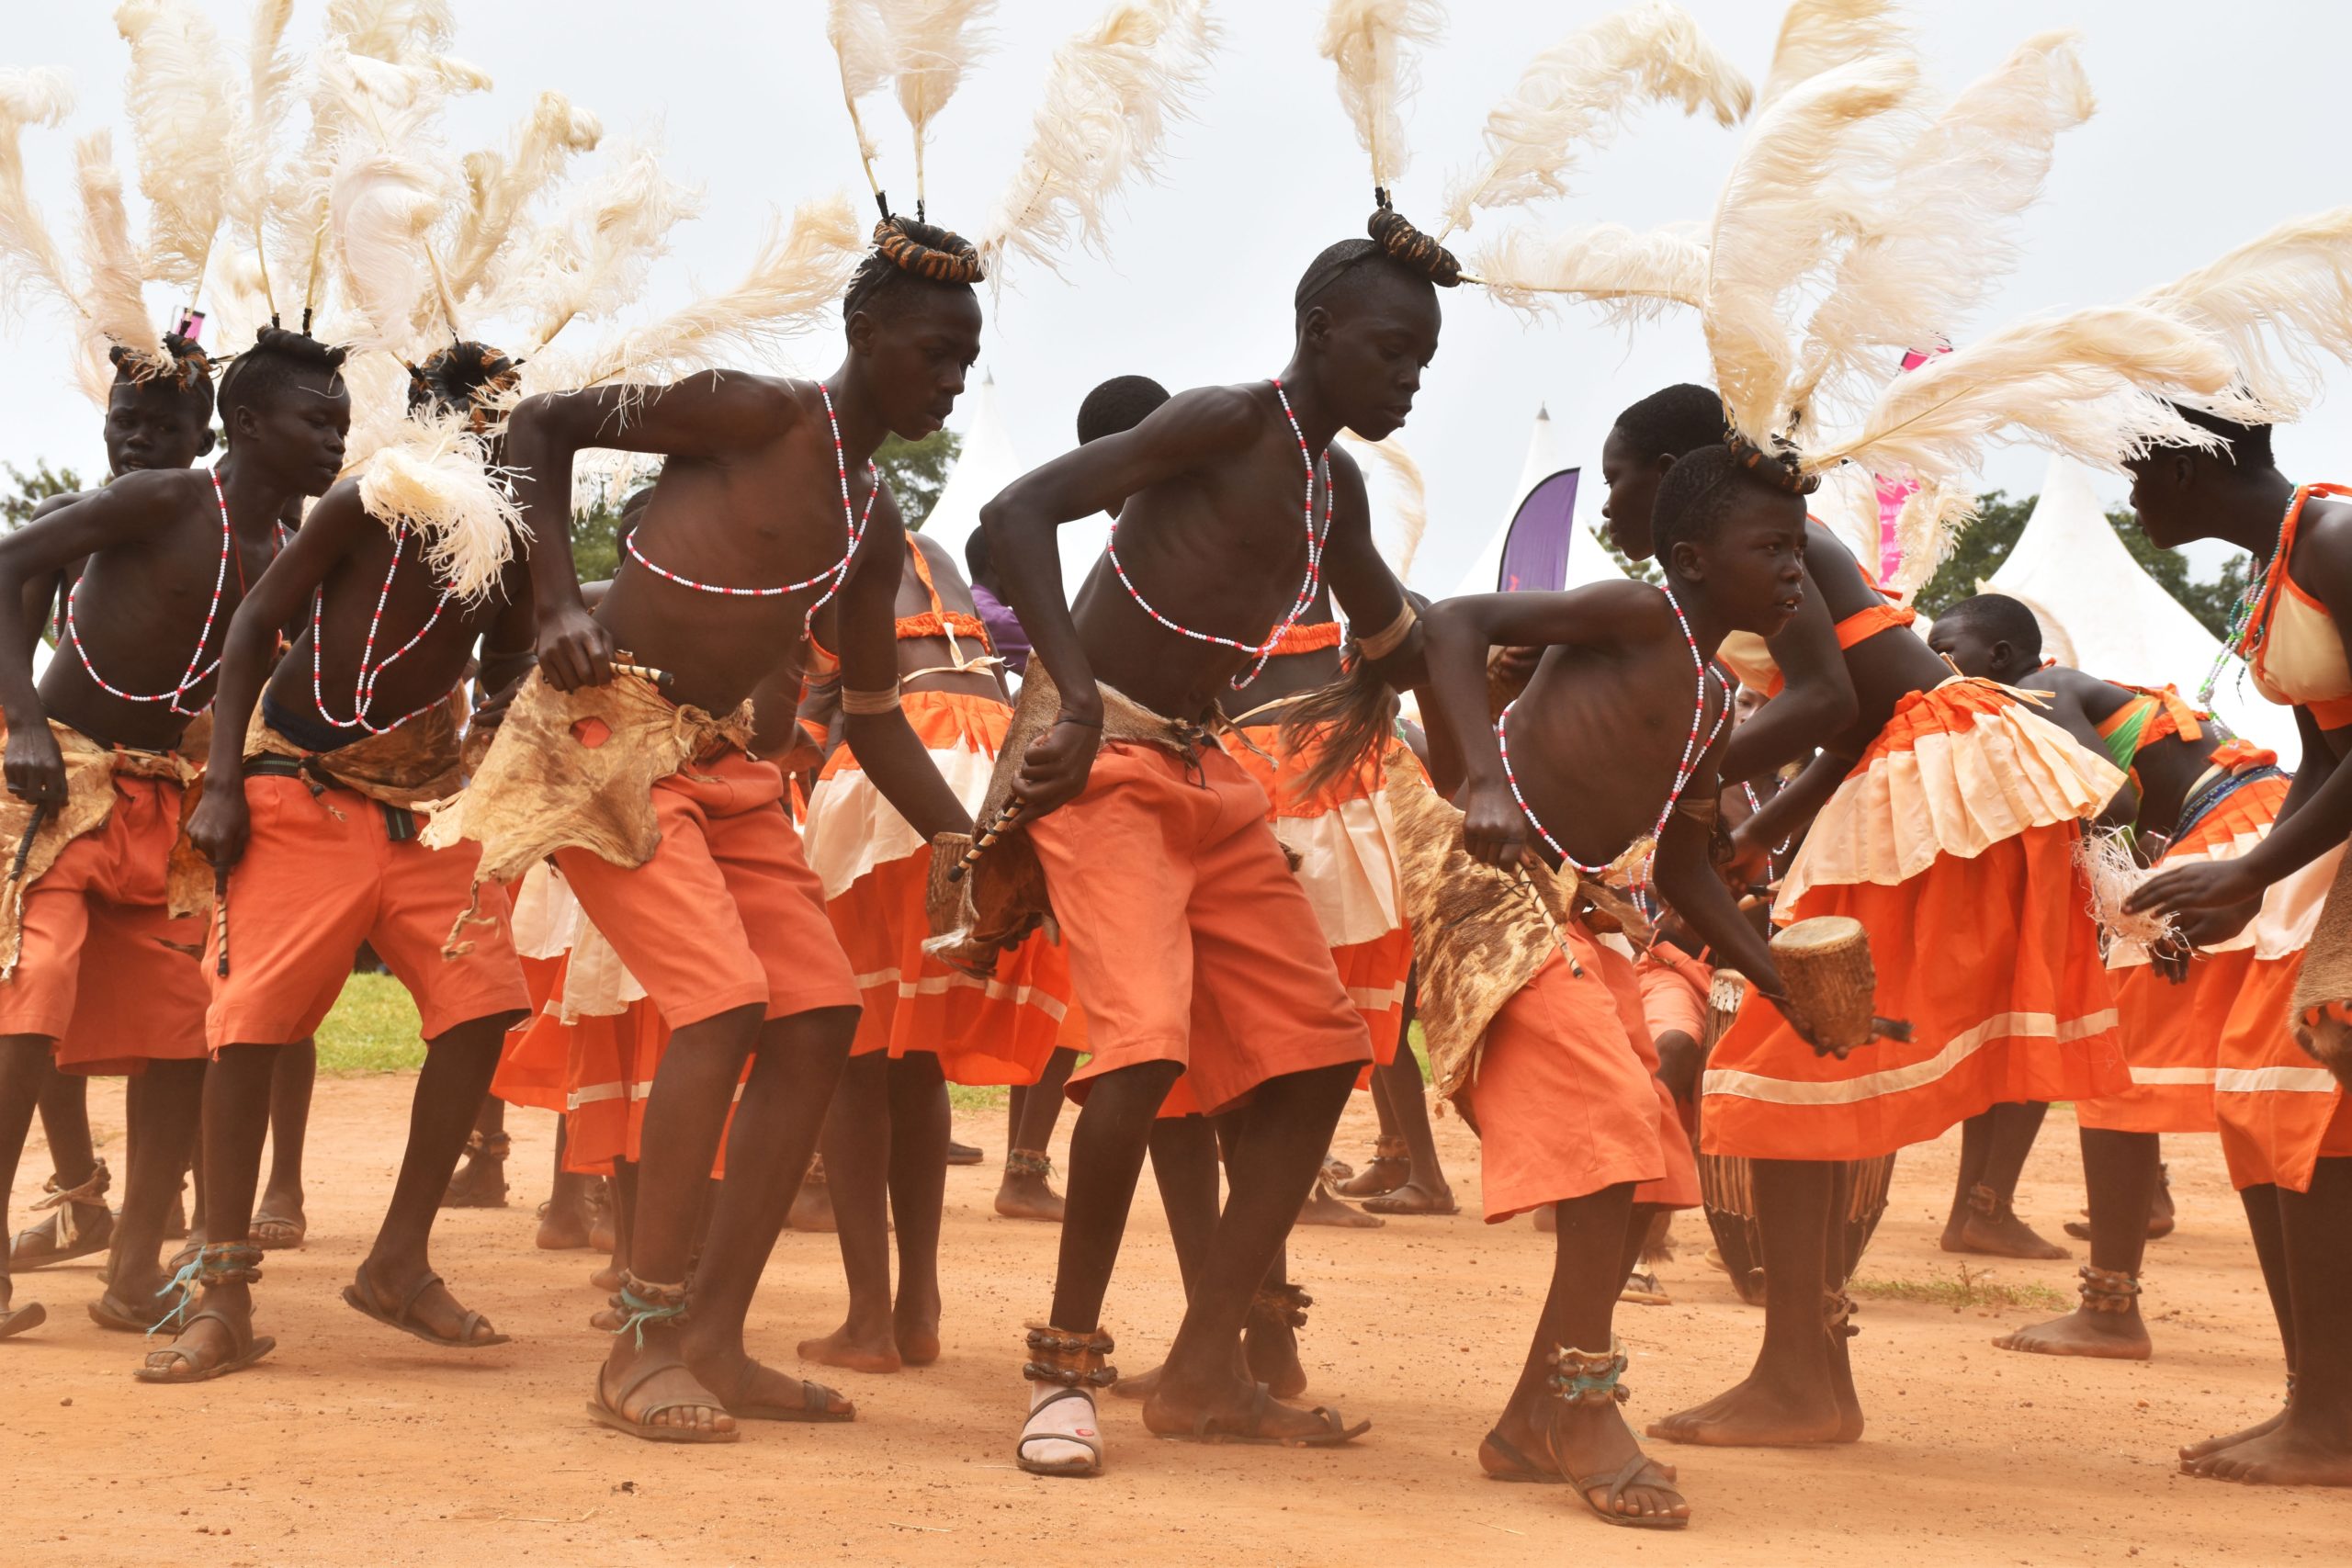 Group of ugandan men in traditional orange clothing perform a traditional dance